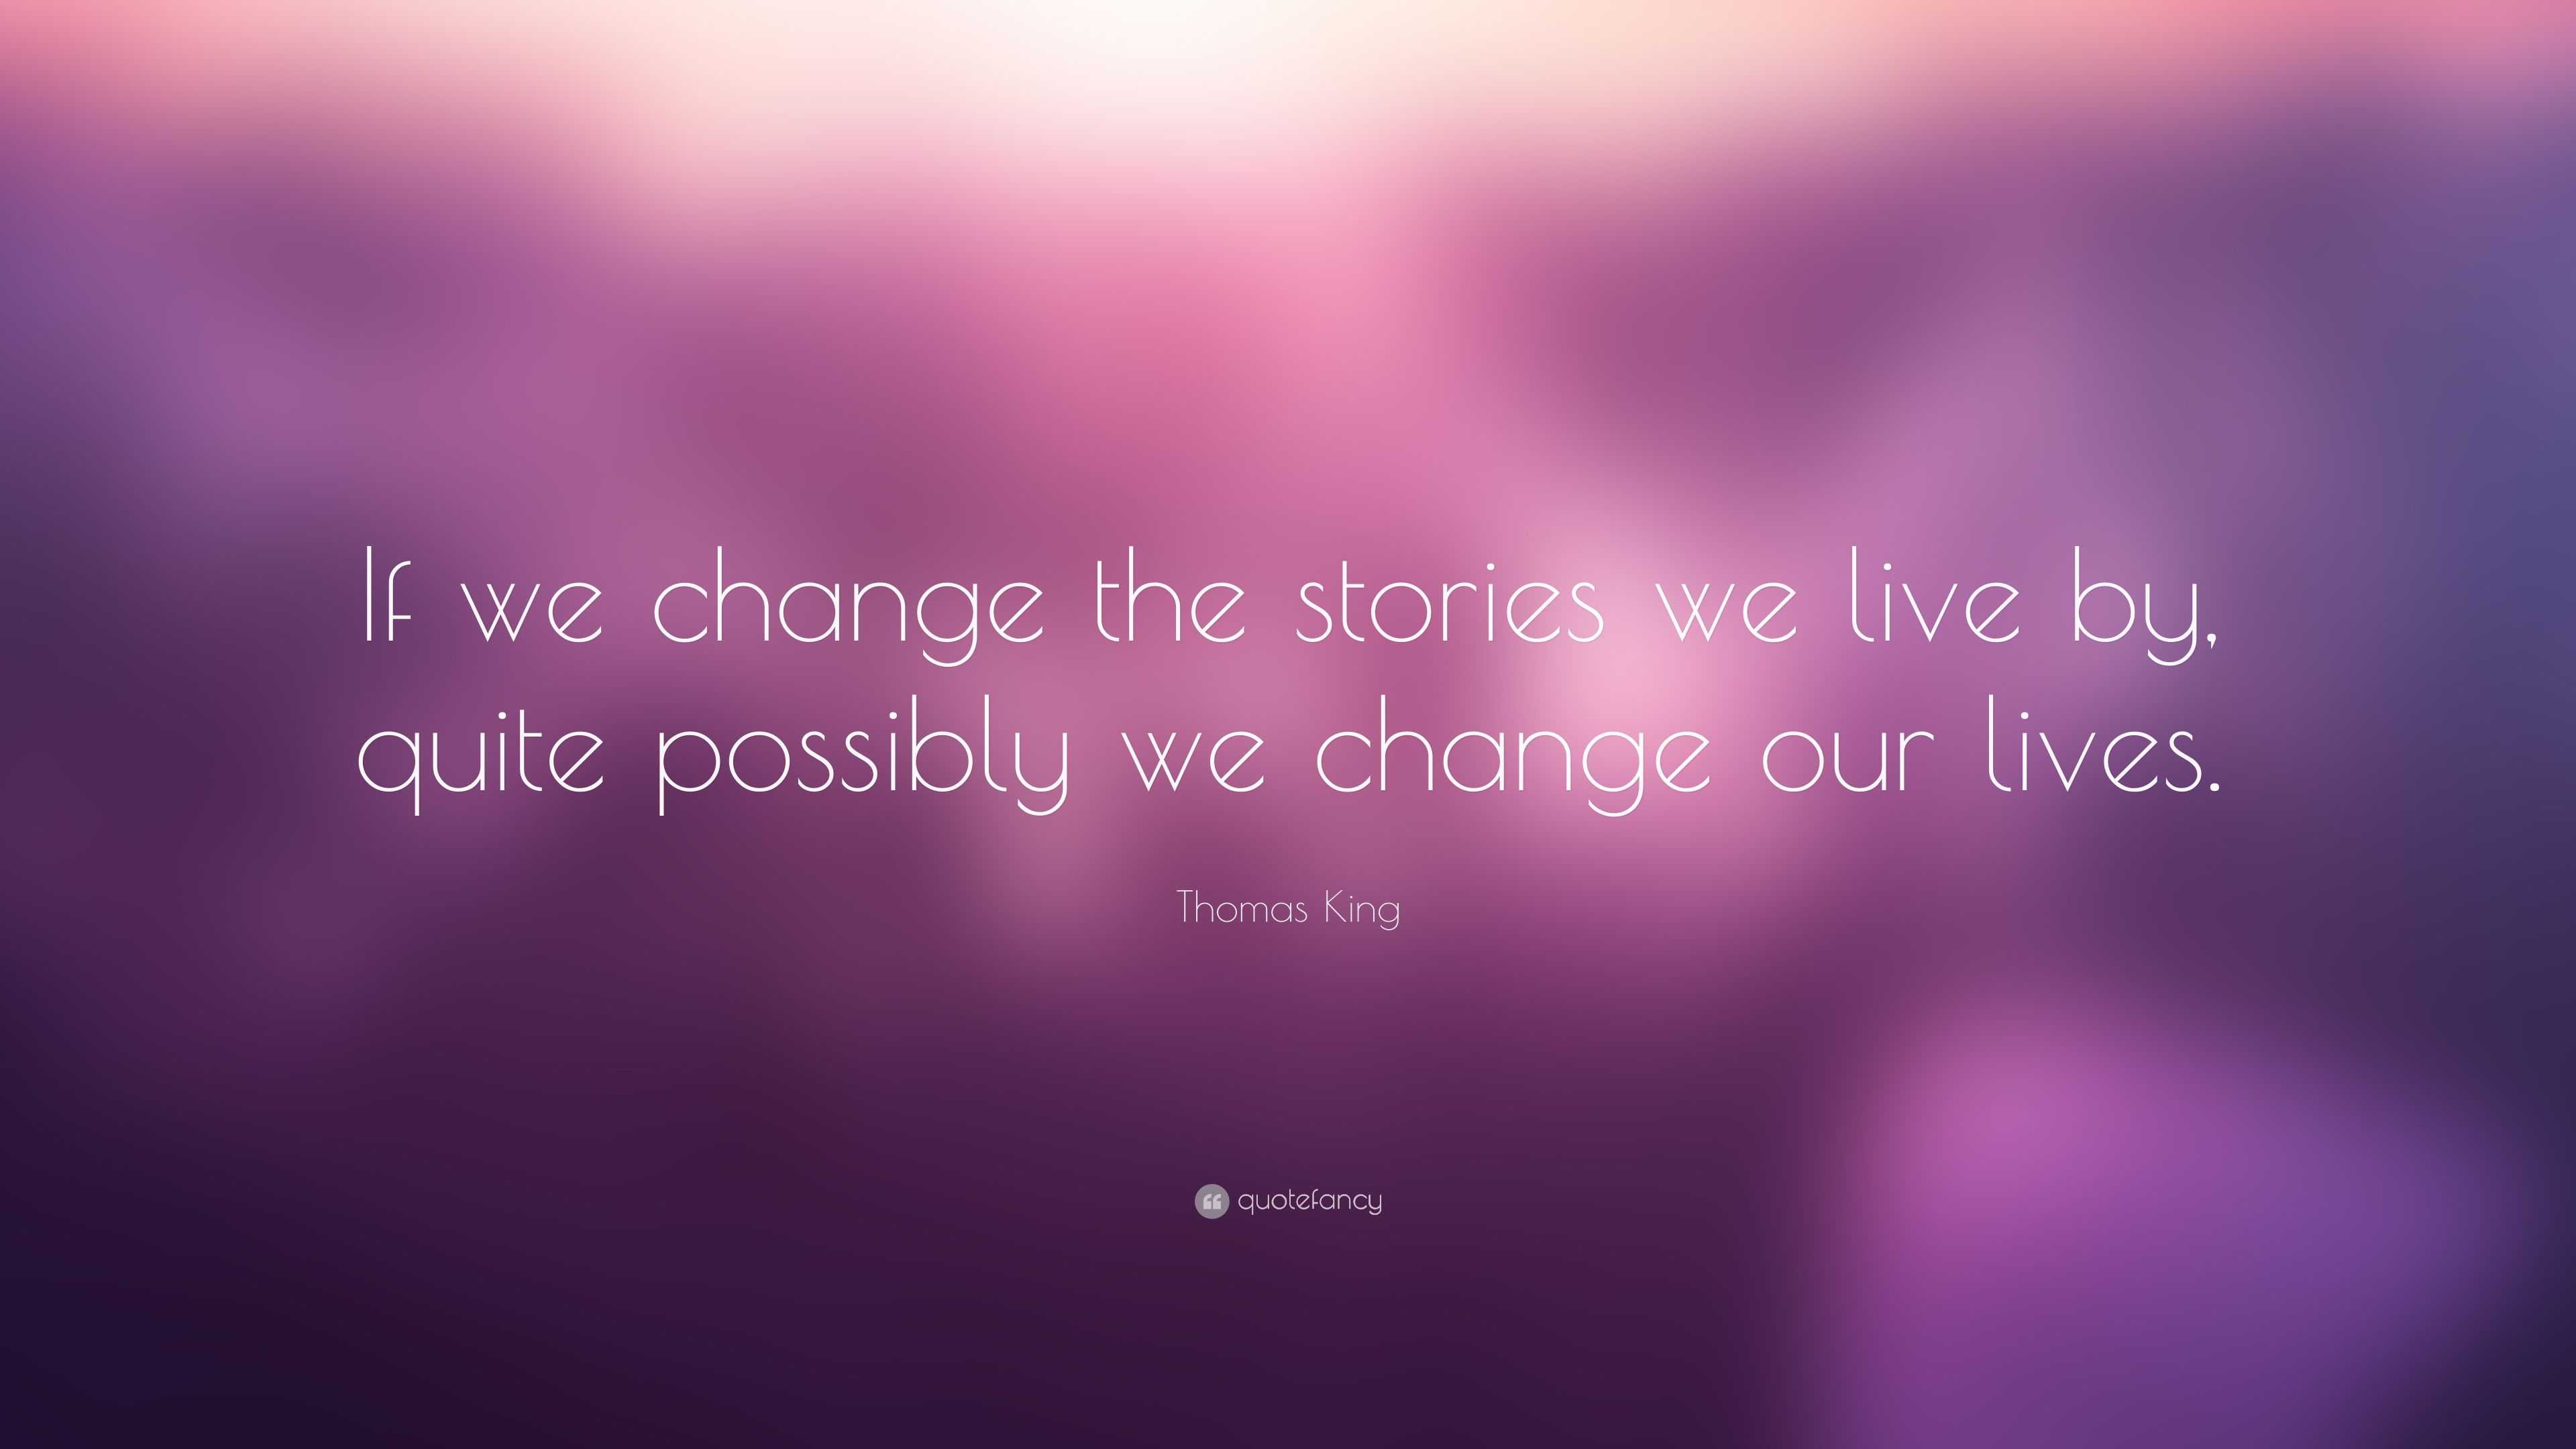 Thomas King Quote: “If we change the stories we live by, quite possibly ...